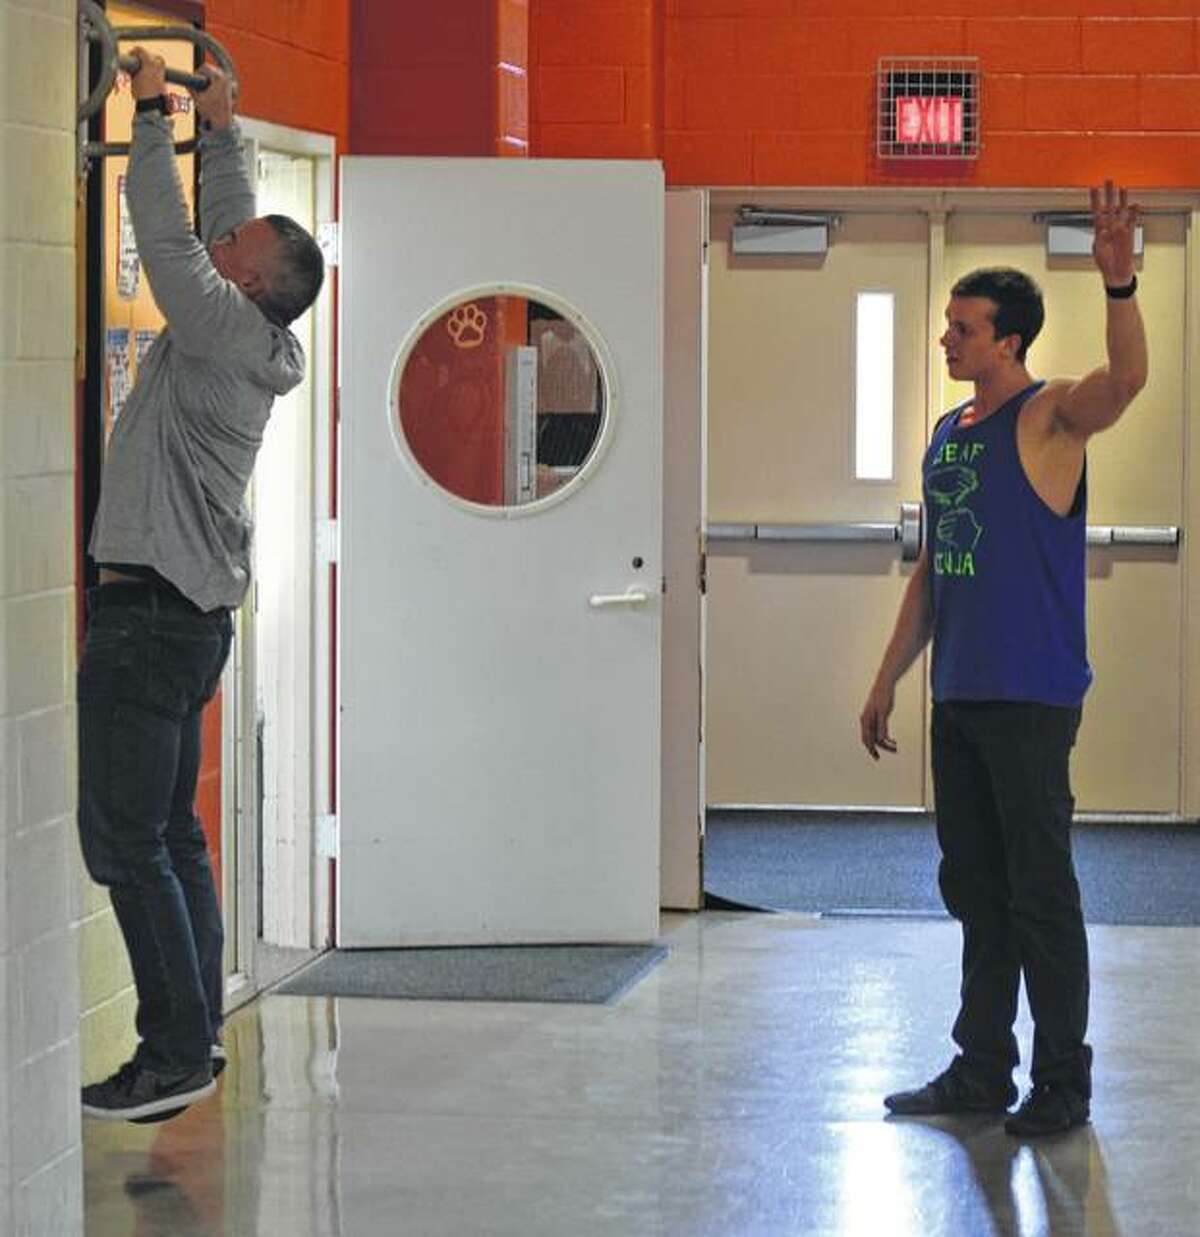 Illinois School for the Deaf High School teacher Jason Frye does as many pull-ups as he can in an attempt to outdo Kyle Schulze. Unfortunately, he was unable to beat the Ninja Warrior finalist.